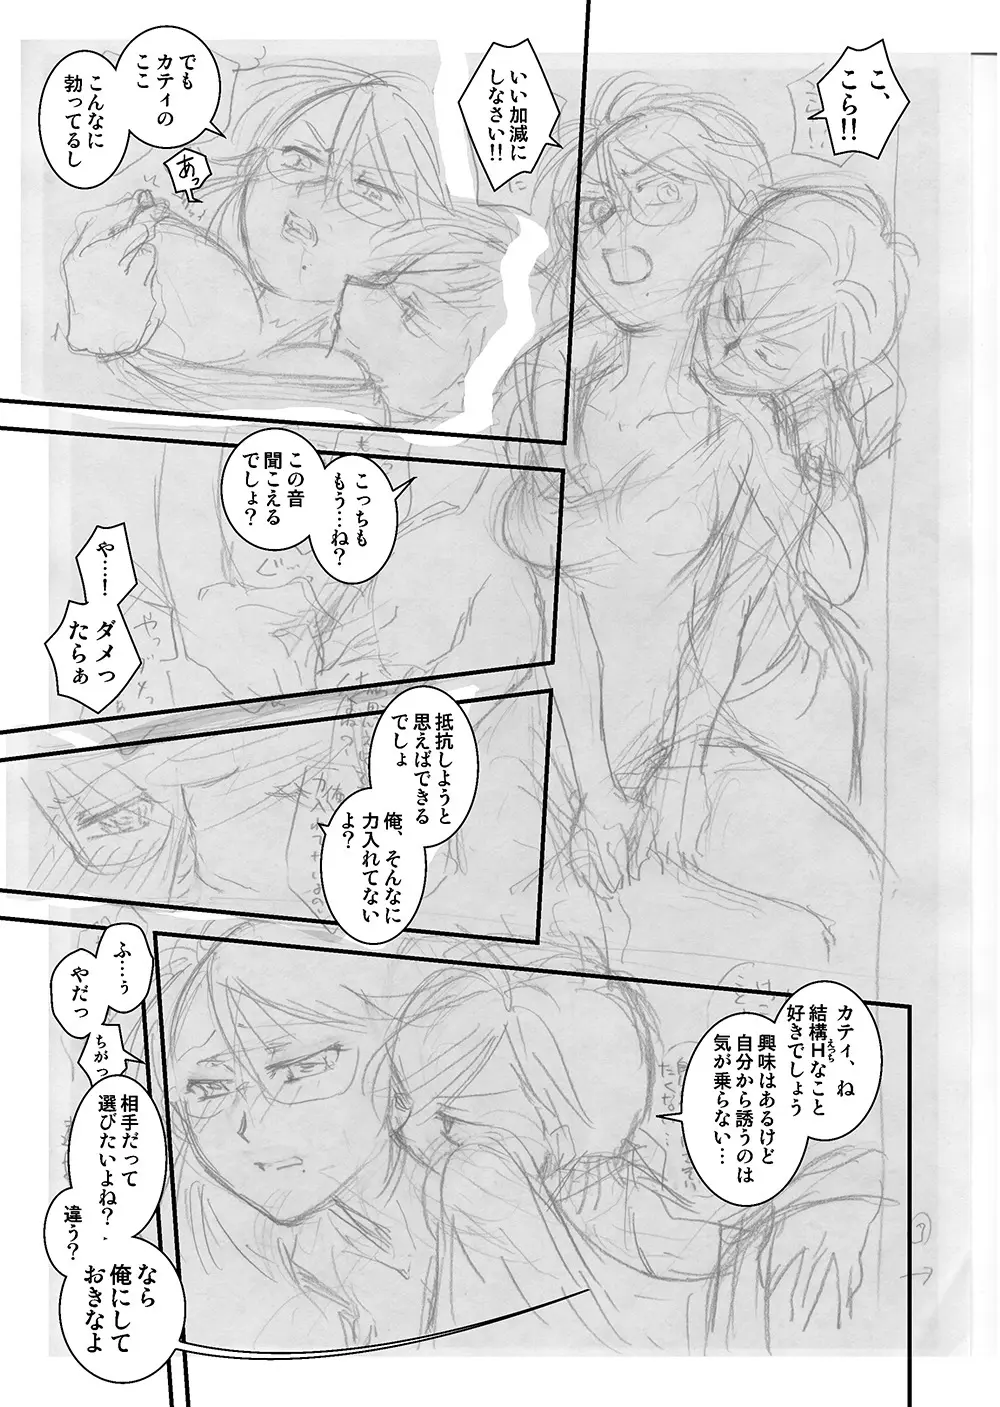 ［WEB再録（？）］たいさとおれ。 - page8